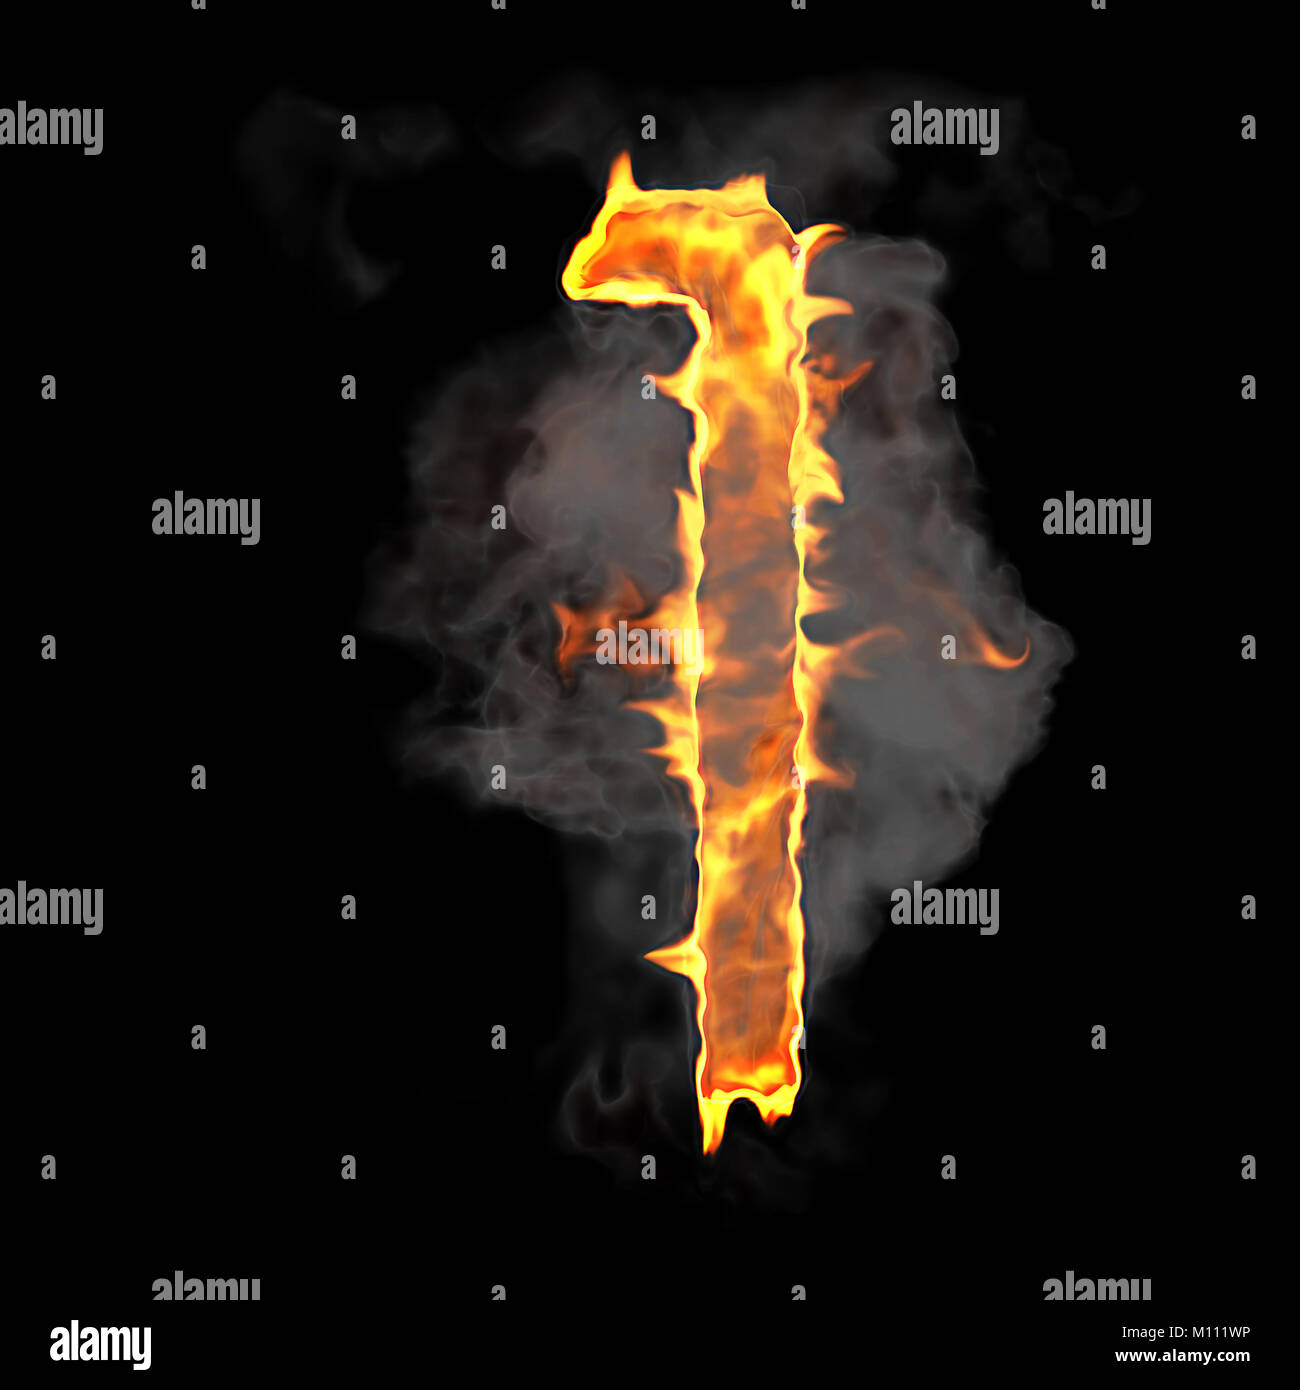 Burning And Flame Font 1 Numeral Over Black Background Stock Photo Alamy